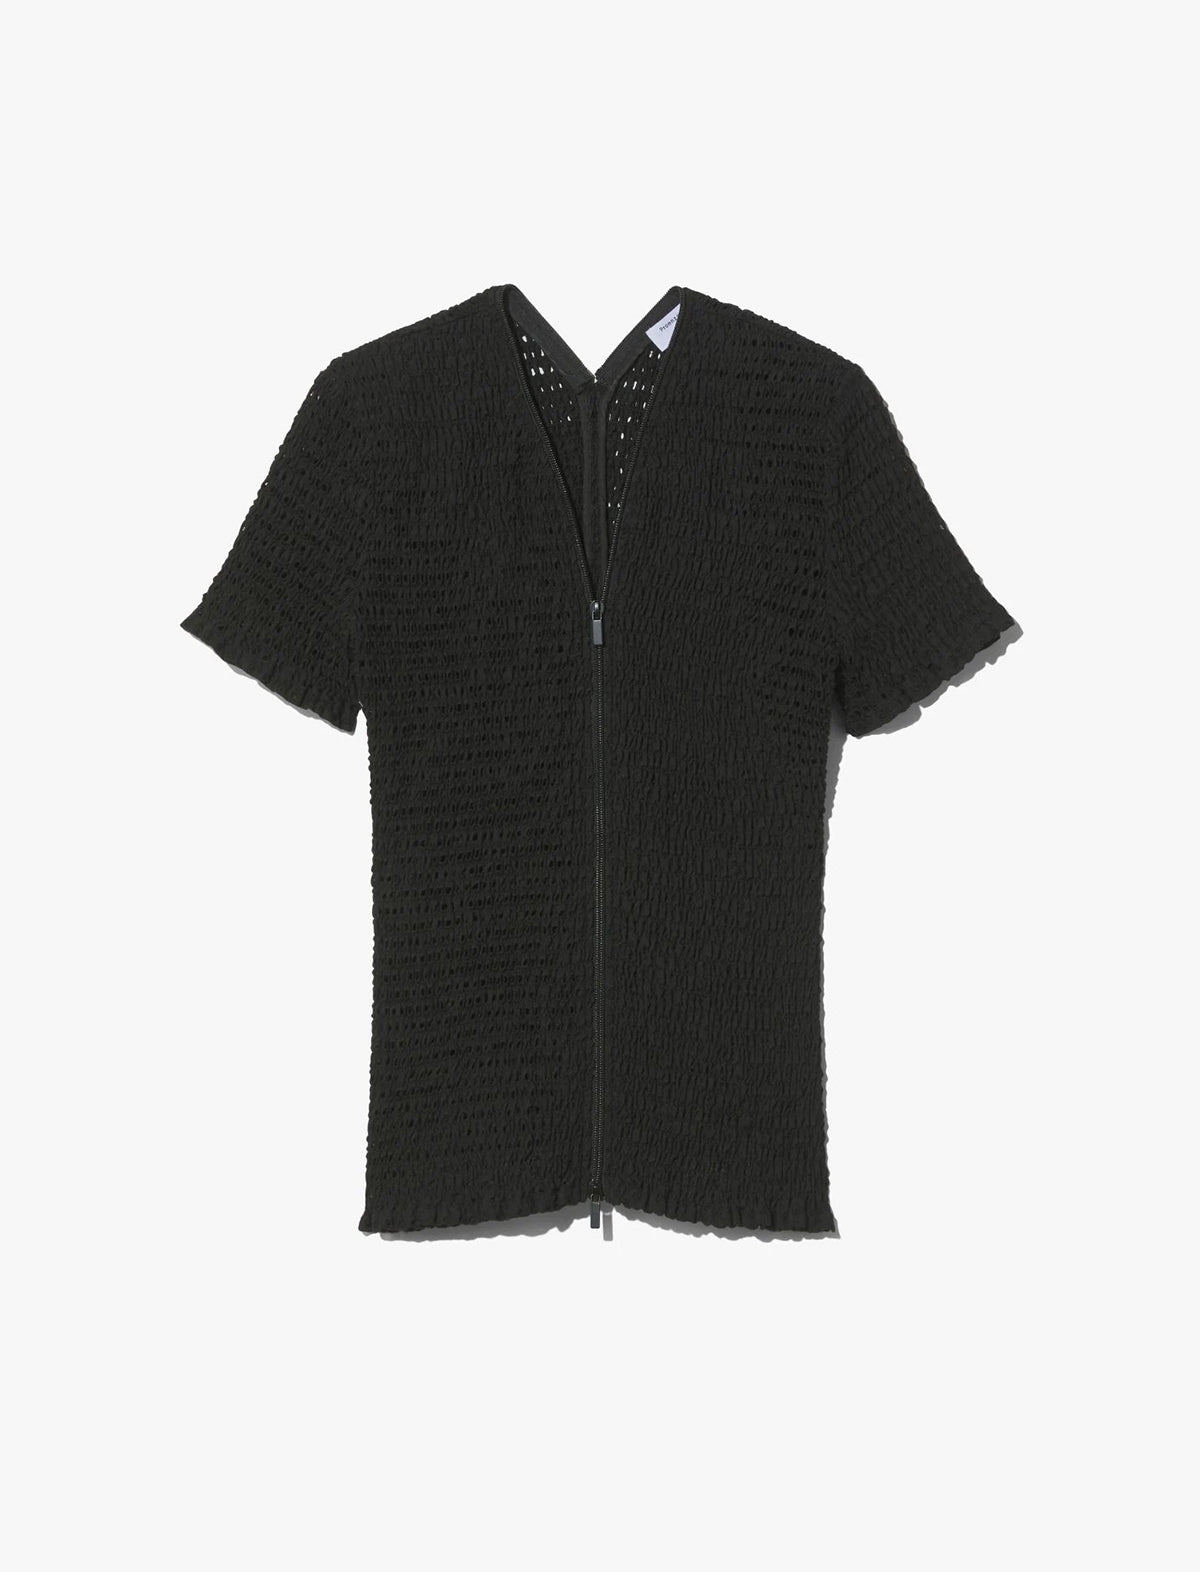 PROENZA SCHOULER WHITE LABEL Broderie Anglaise Top in Black